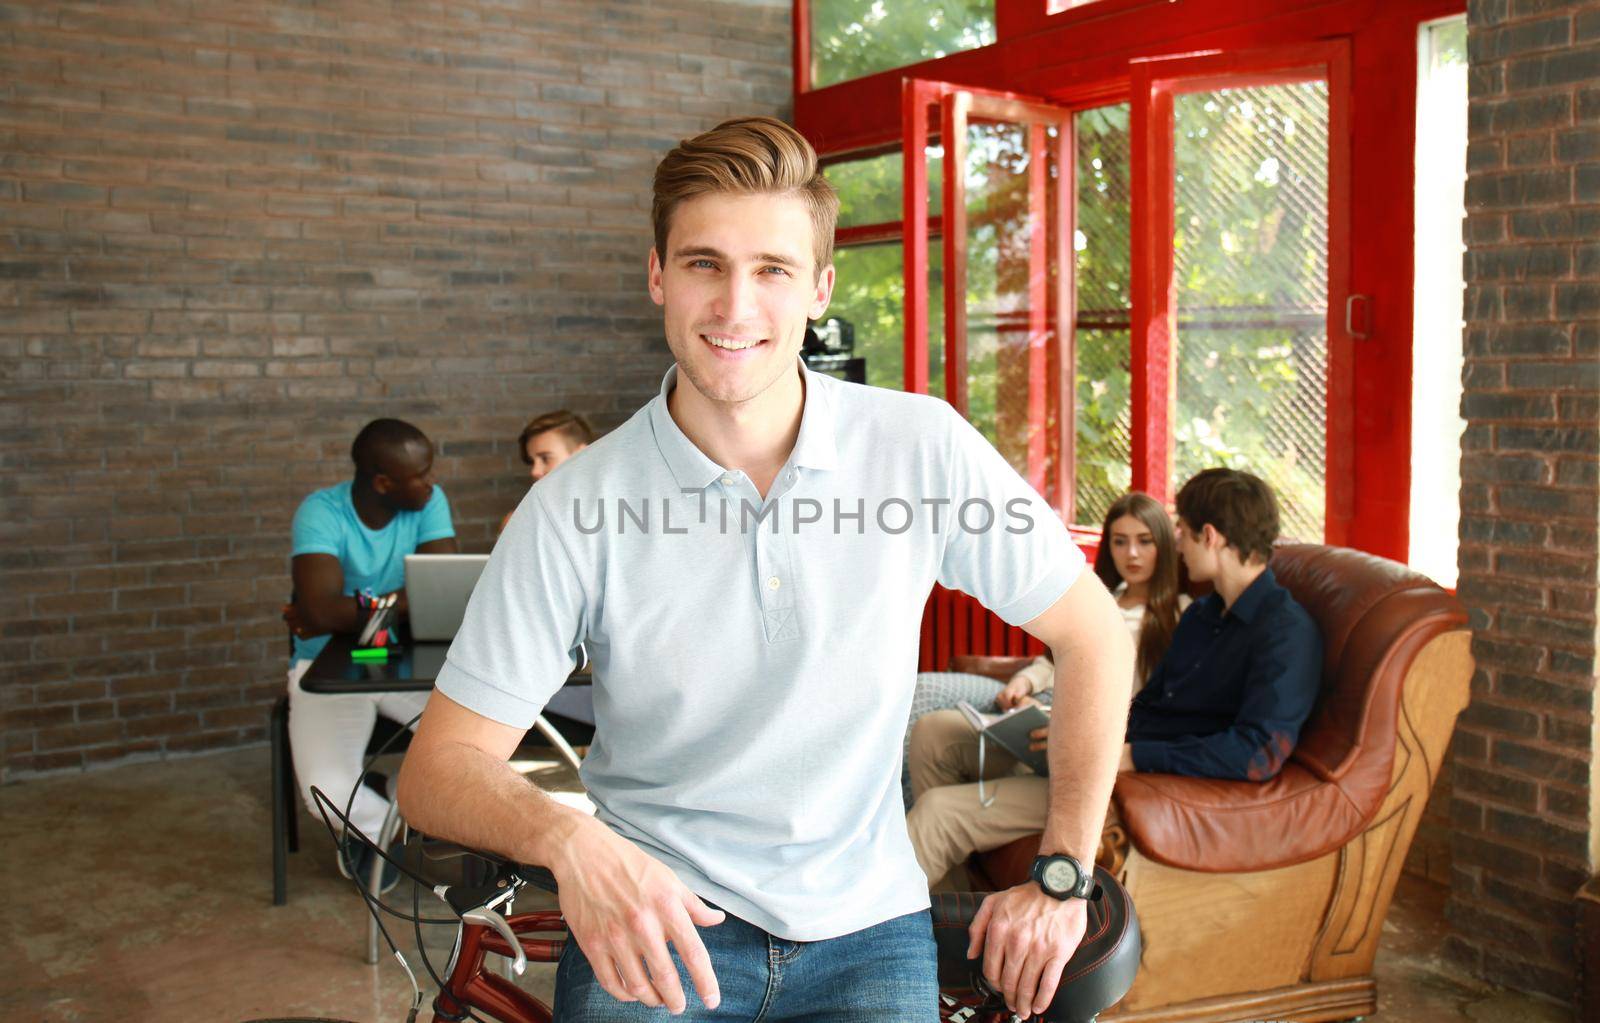 Young man sitting on a bicycle in a modern office by tsyhun